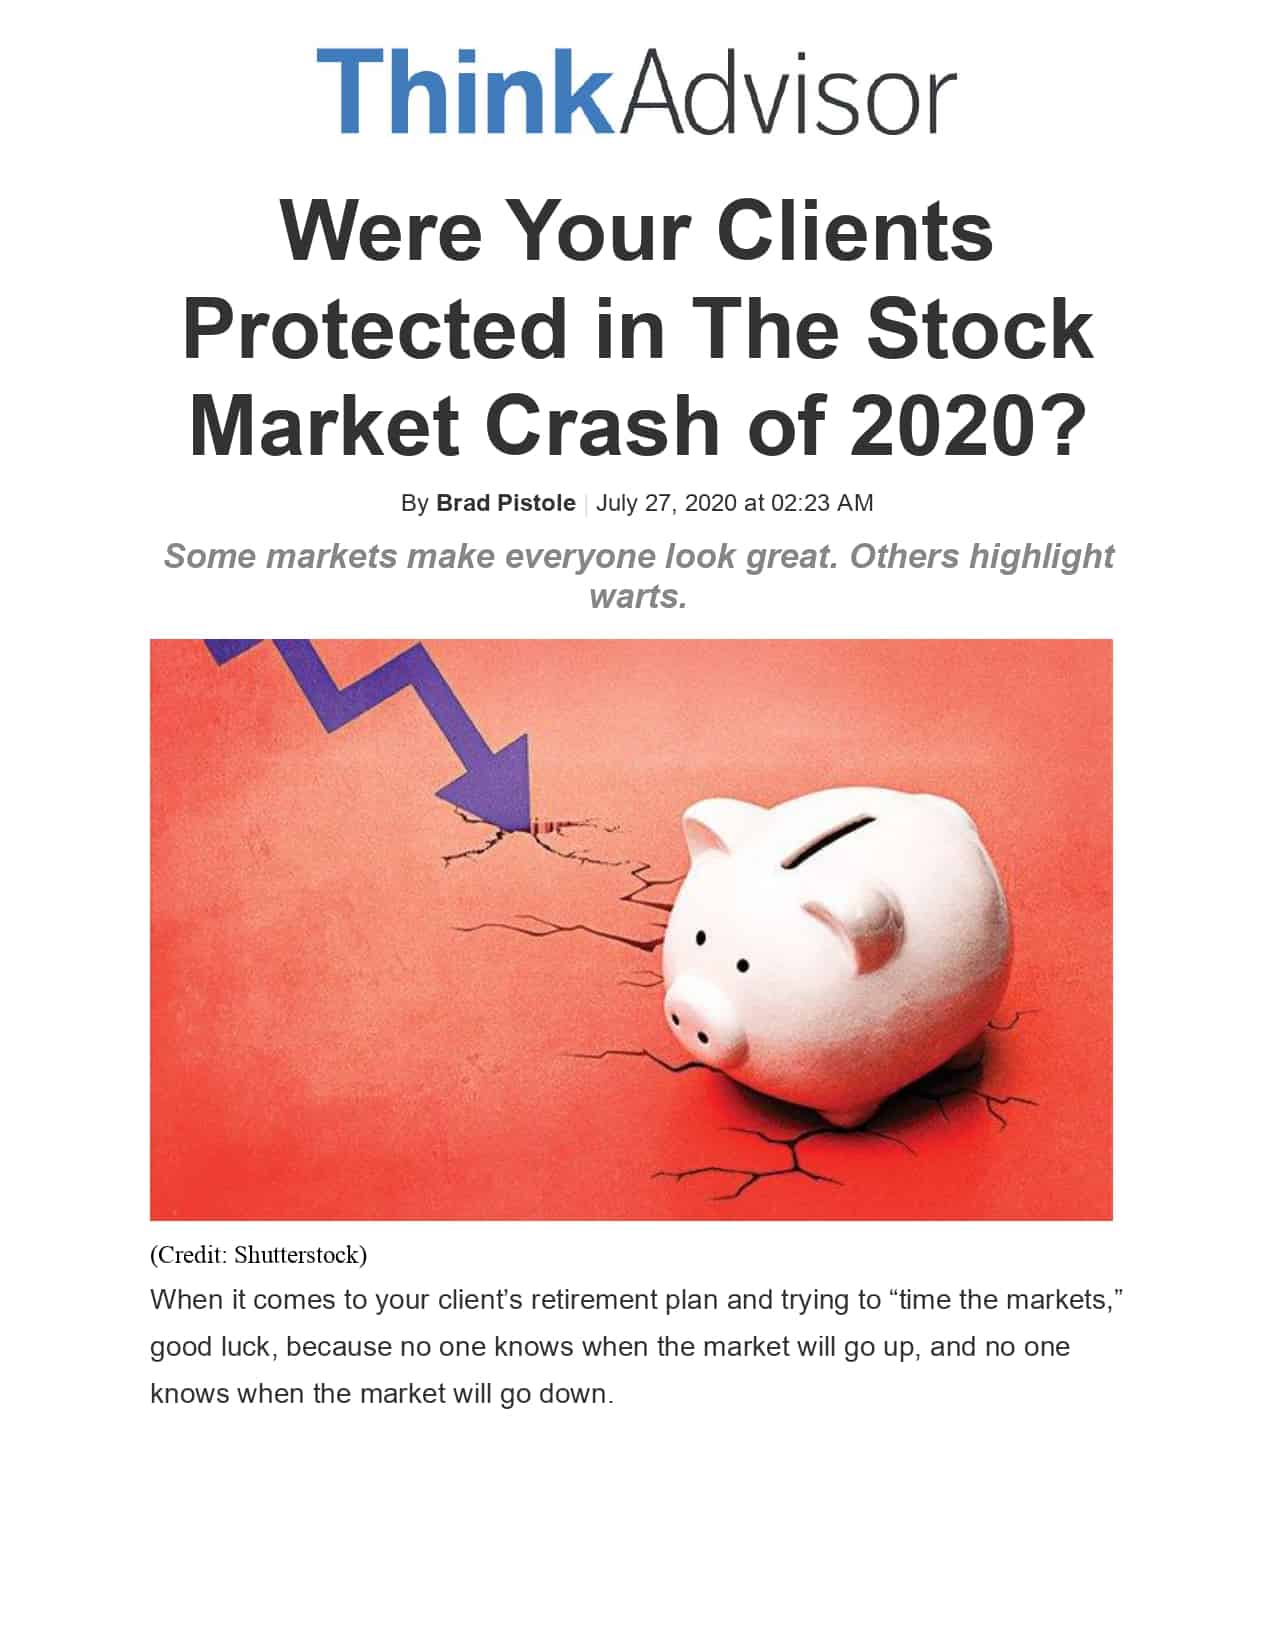 Were Your Clients Protected in The Stock Market Crash of 2020?